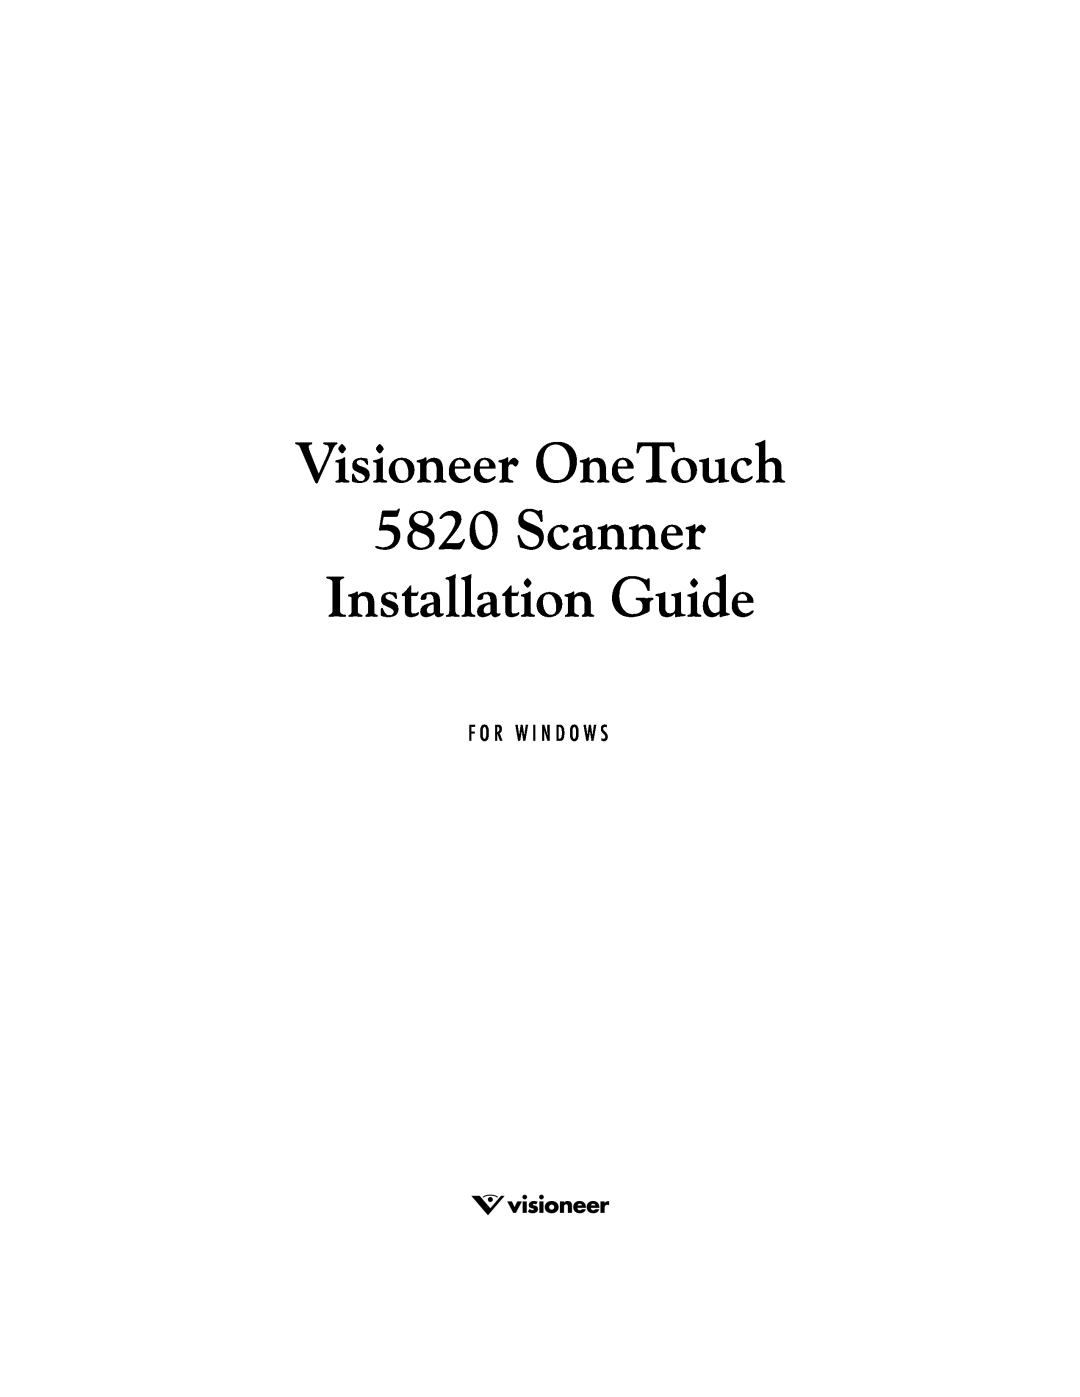 Visioneer manual Visioneer OneTouch 5820 Scanner Installation Guide, F O R W I N D O W S 